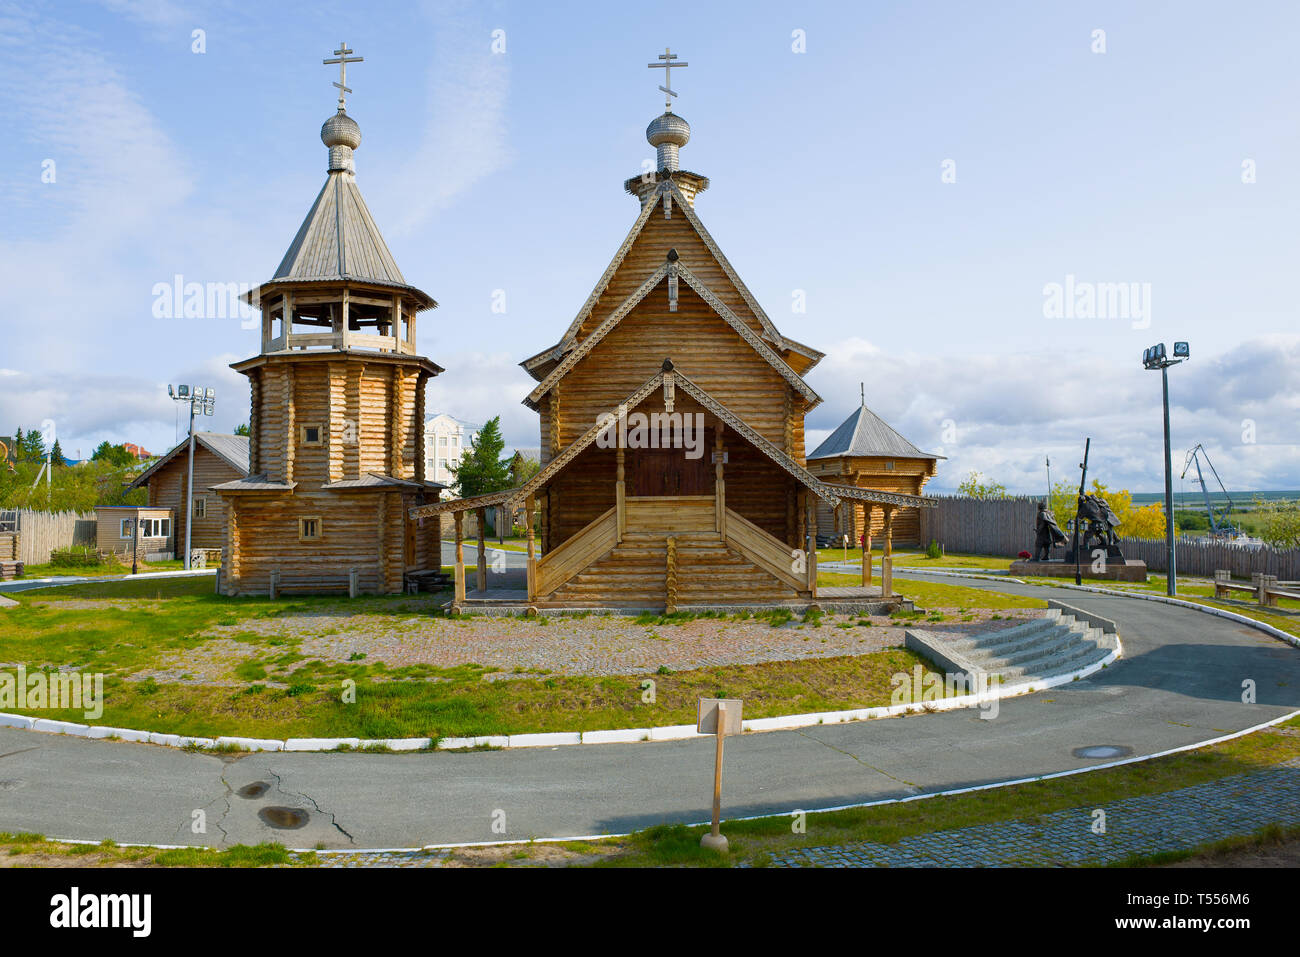 SALEKHARD, RUSSIA - AUGUST 29, 2018: A cloudy August day in the historical and architectural complex 'Obdorsk stockaded town' Stock Photo